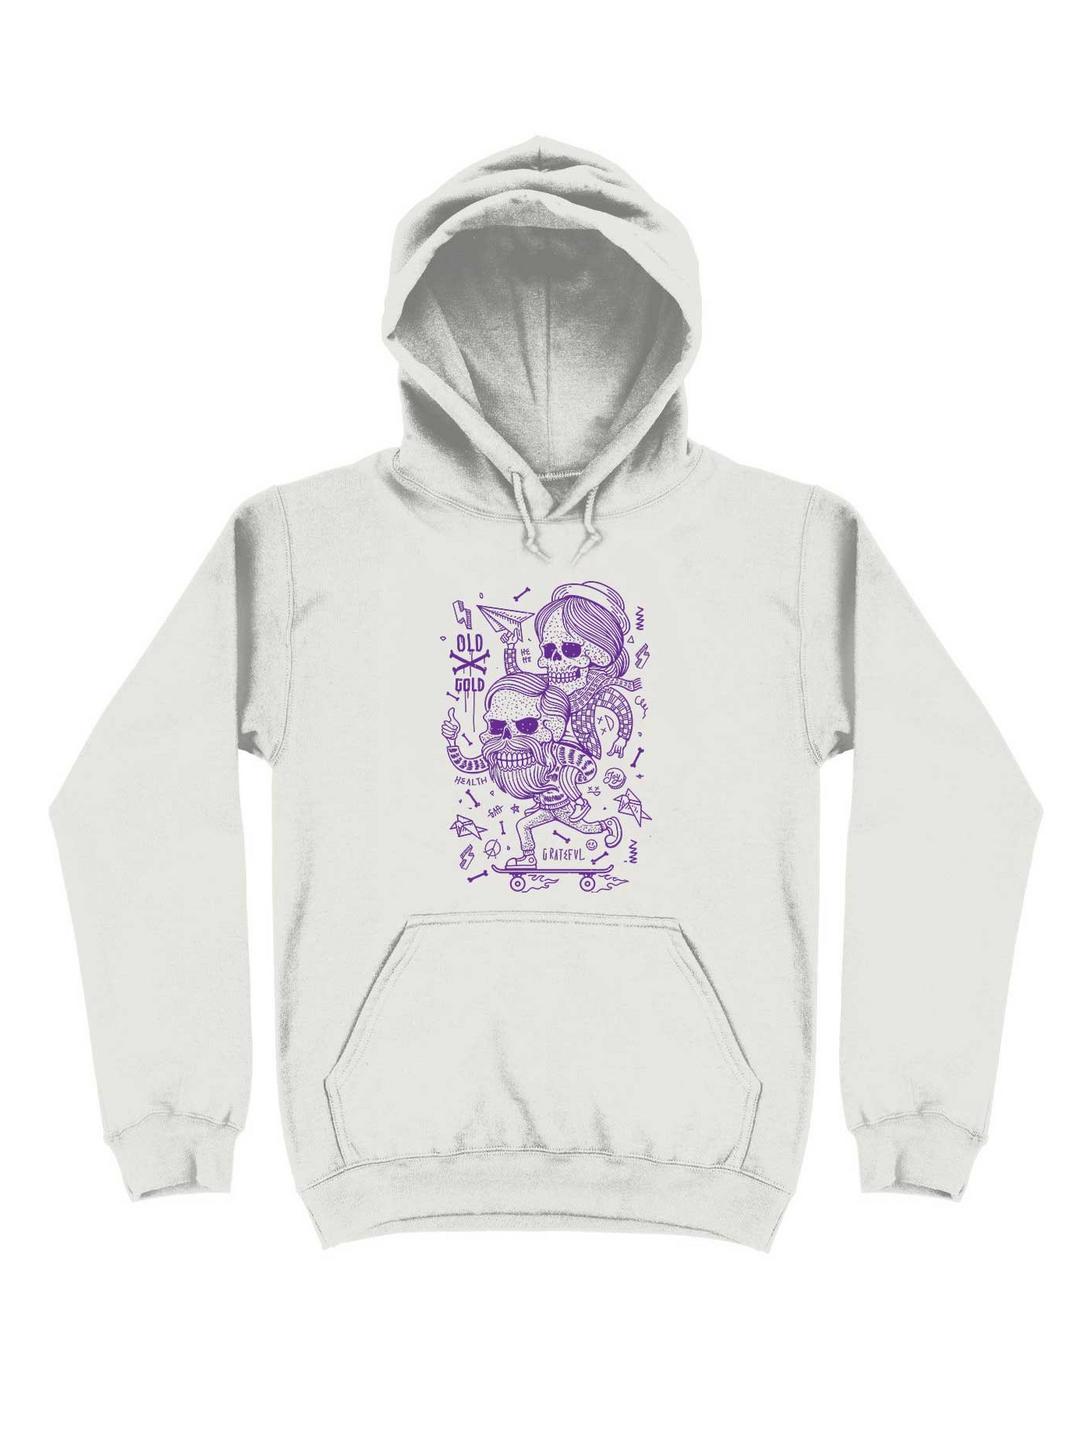 Old X Gold Hoodie, WHITE, hi-res